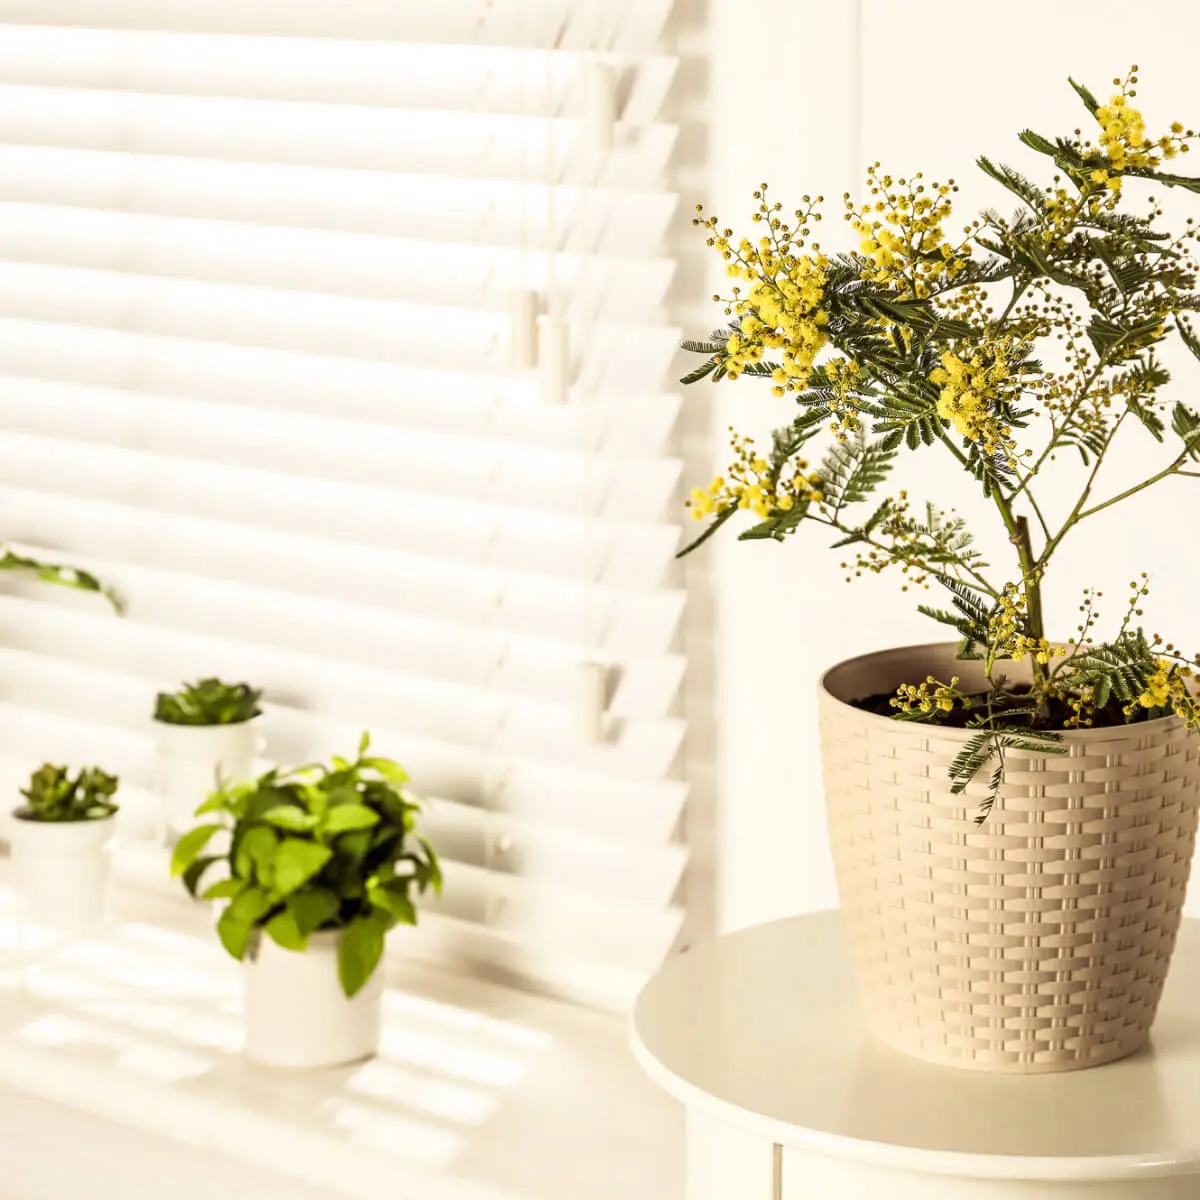 A pot plant sits beside a window which has white blinds pulled down and closed shut to keep out sunlight and heat.